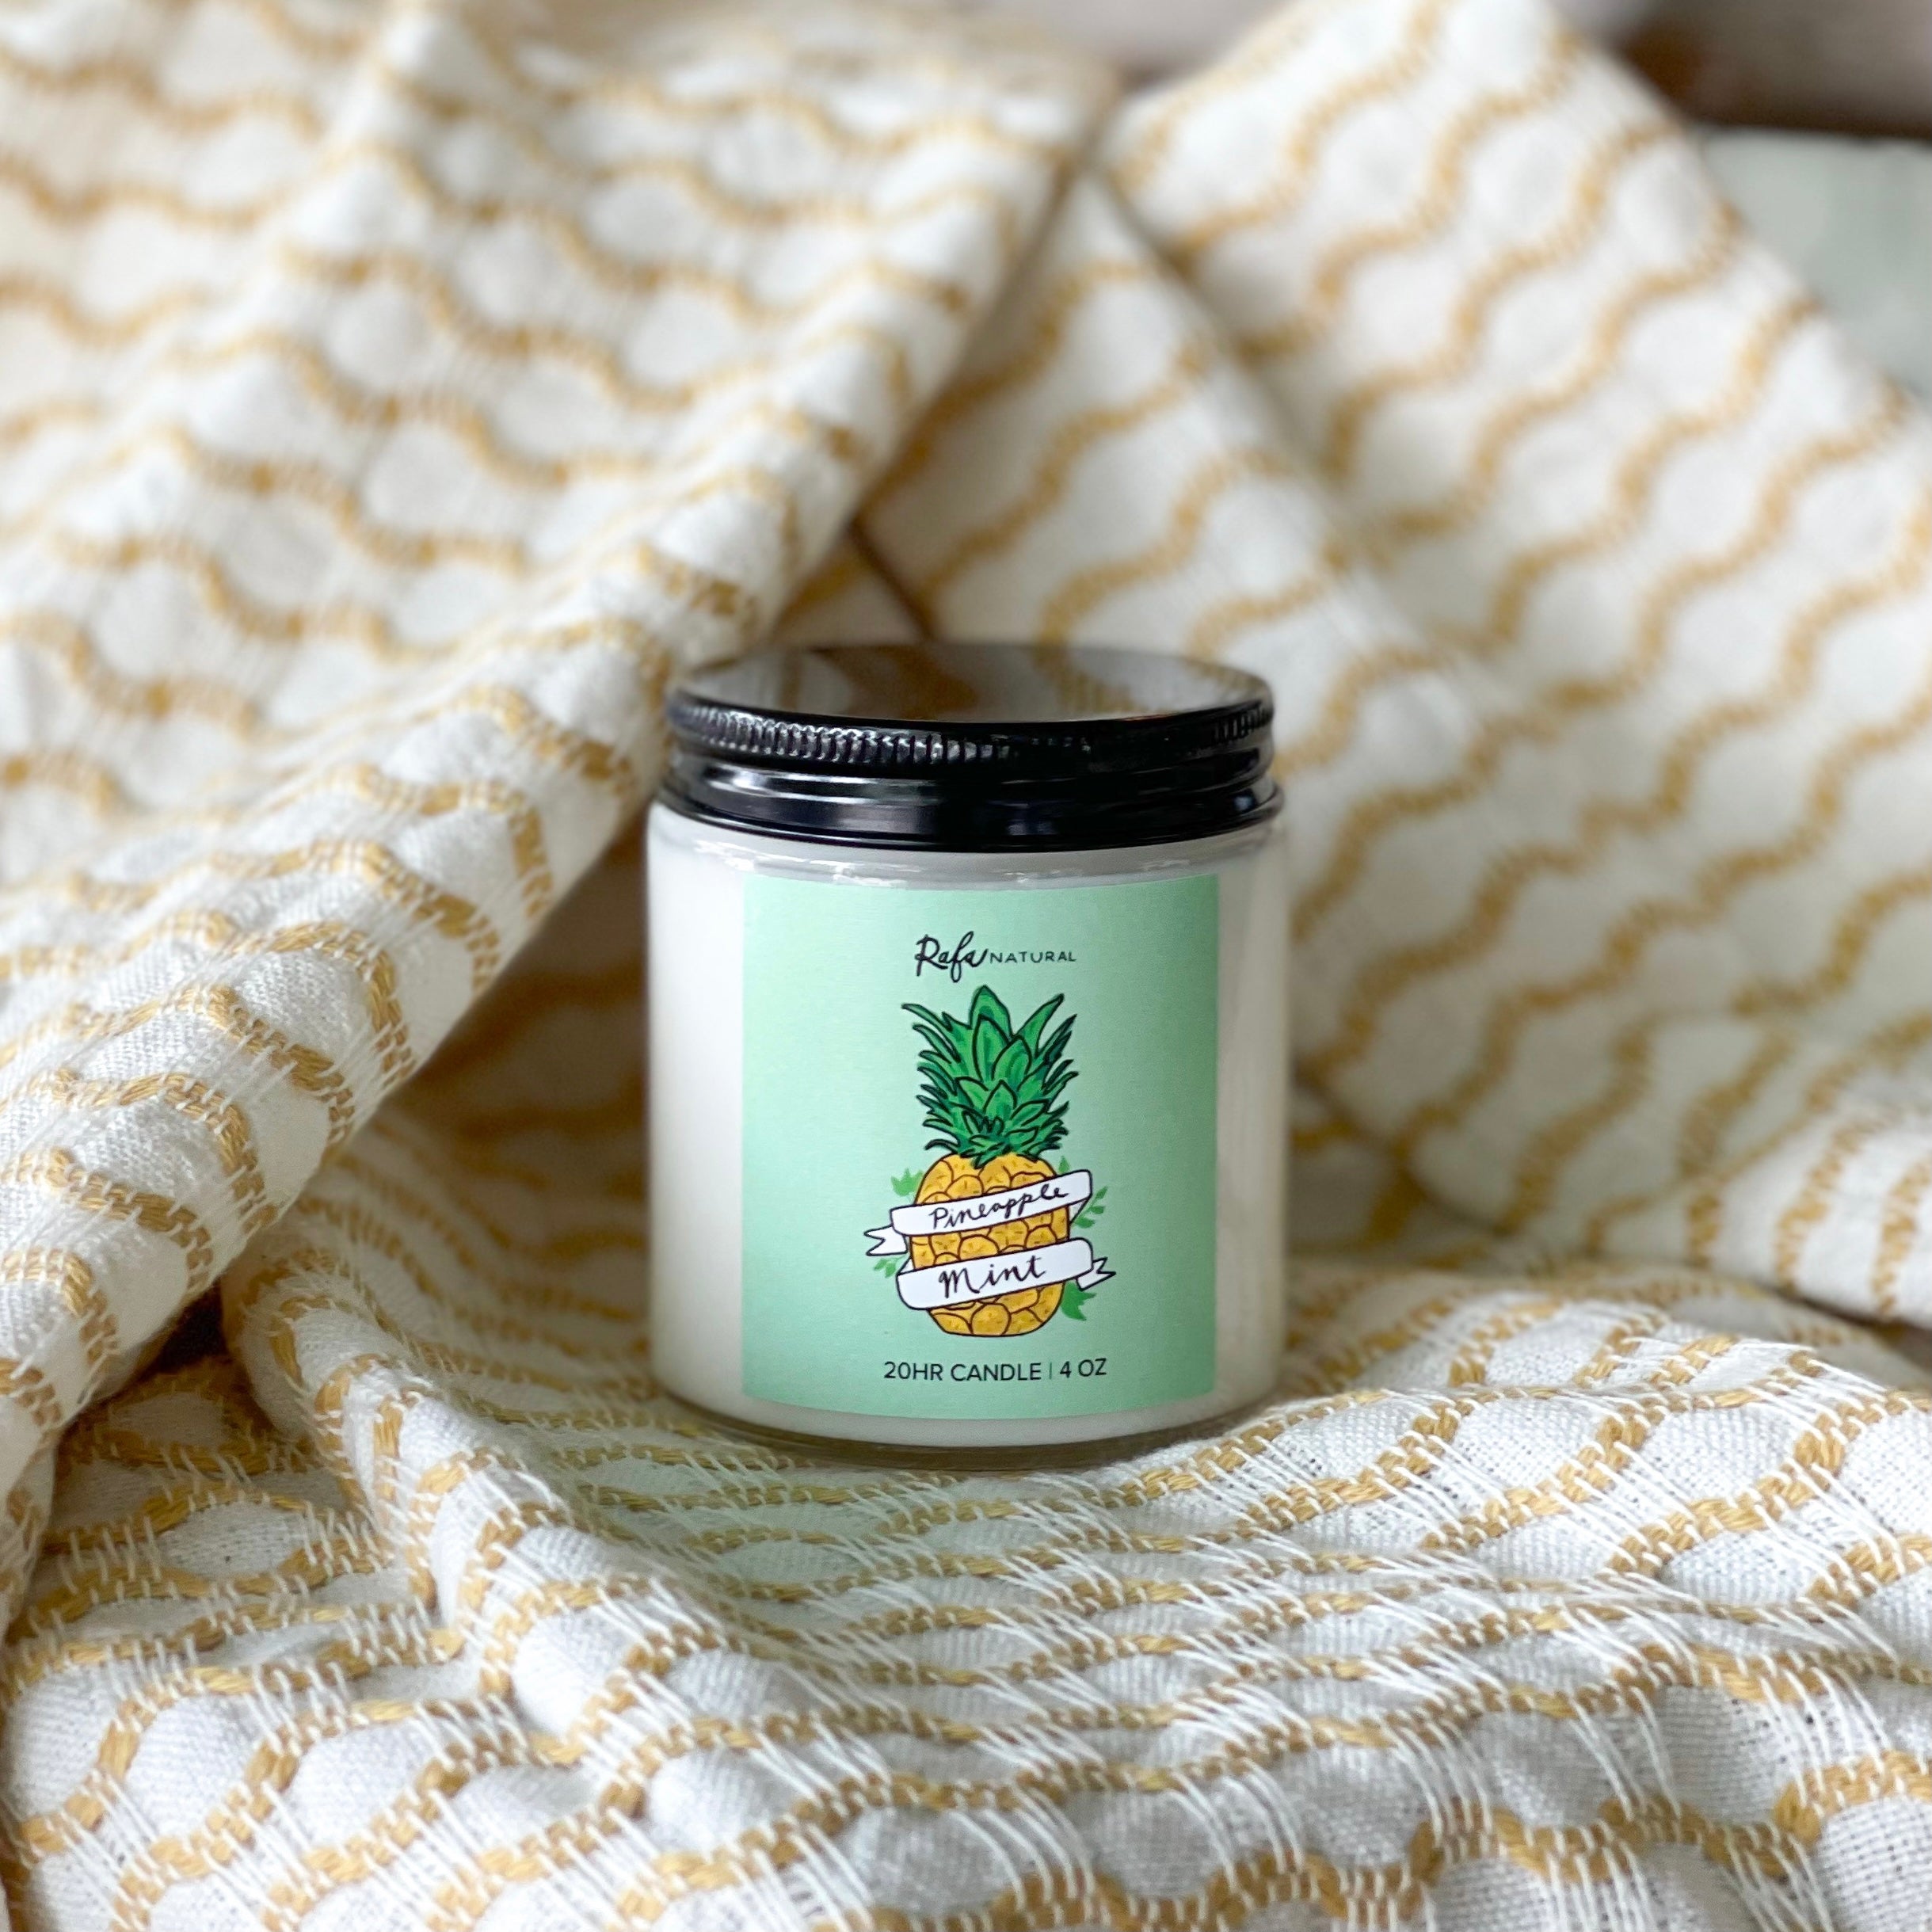 20Hr Pineapple Mint Soy Candle